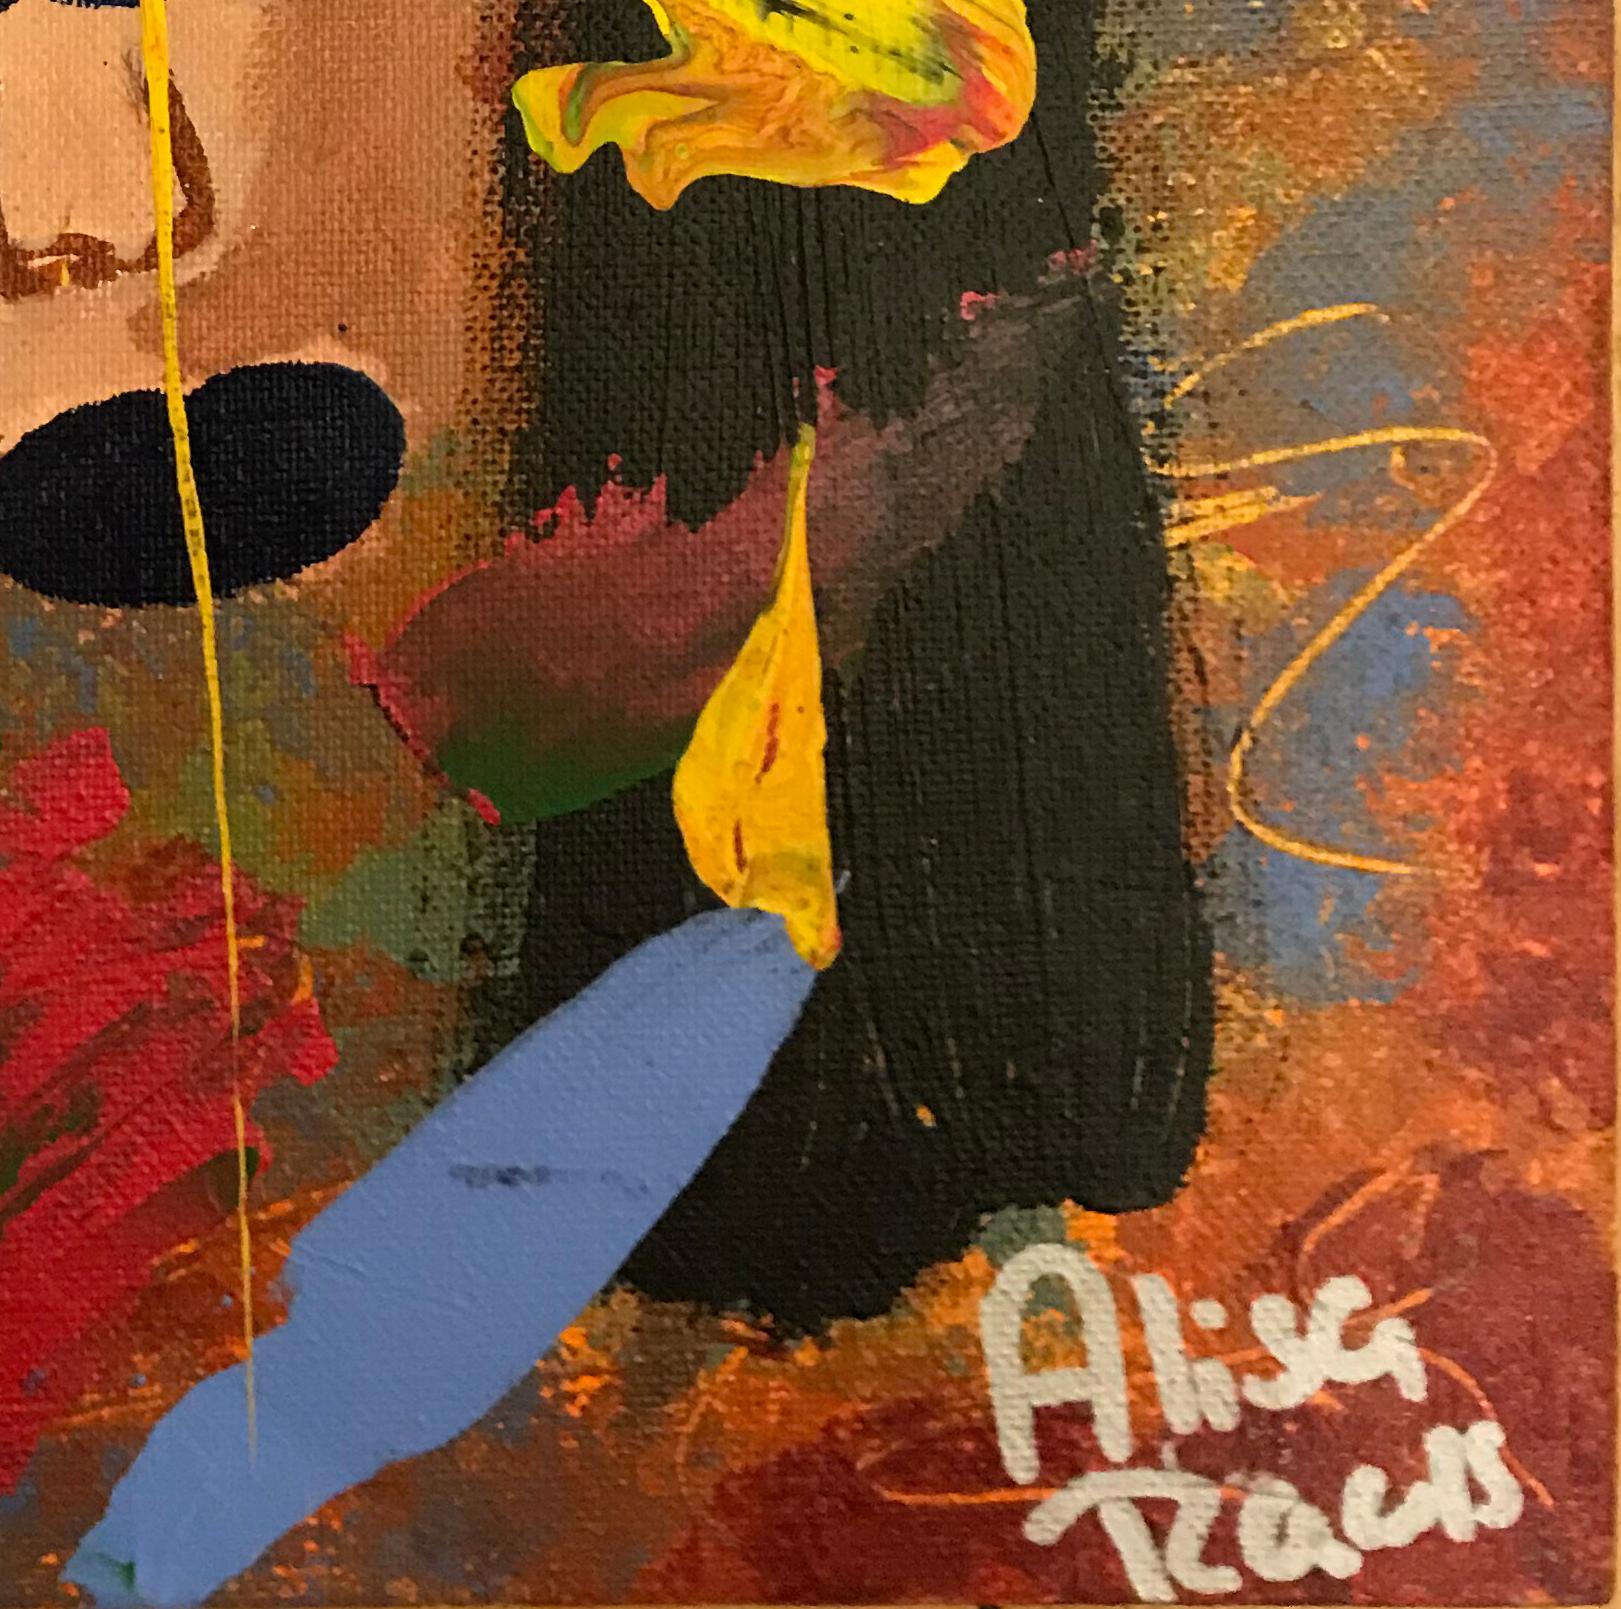 Born in 1988 in Elgin, Illinois to a Puerto Rican father and African American mother, Rawl's artwork is a fusion of the two cultures that also merges Abstract with modern art. Alisa's influences include: Julio Rosado De Valle, Henri Matisse, Helen